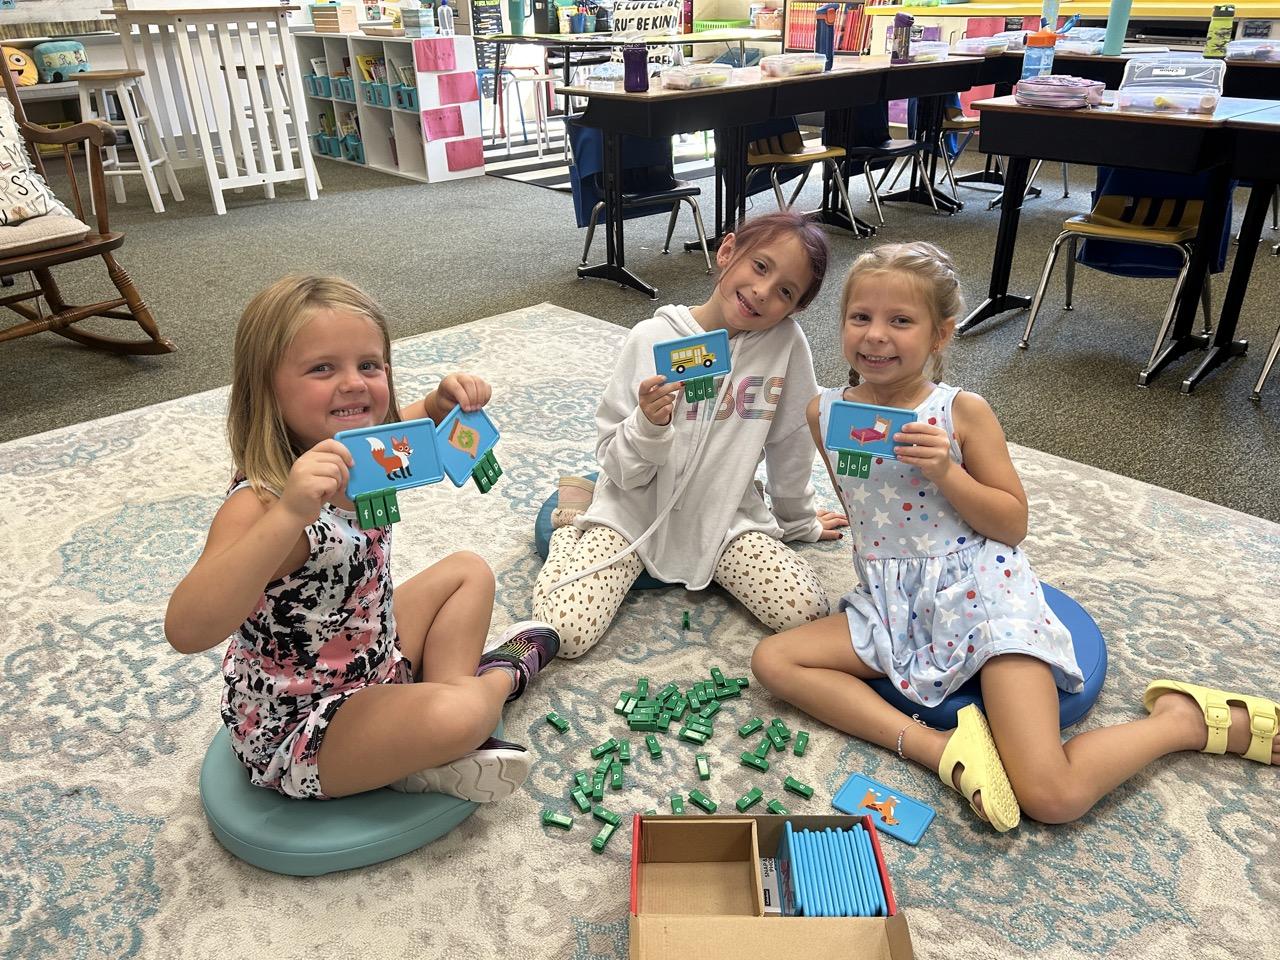 Chloe Zeminski, Gemma Armbrust and Clara Briscoe work together on their phonics skills to build new words with an interactive snap and build center